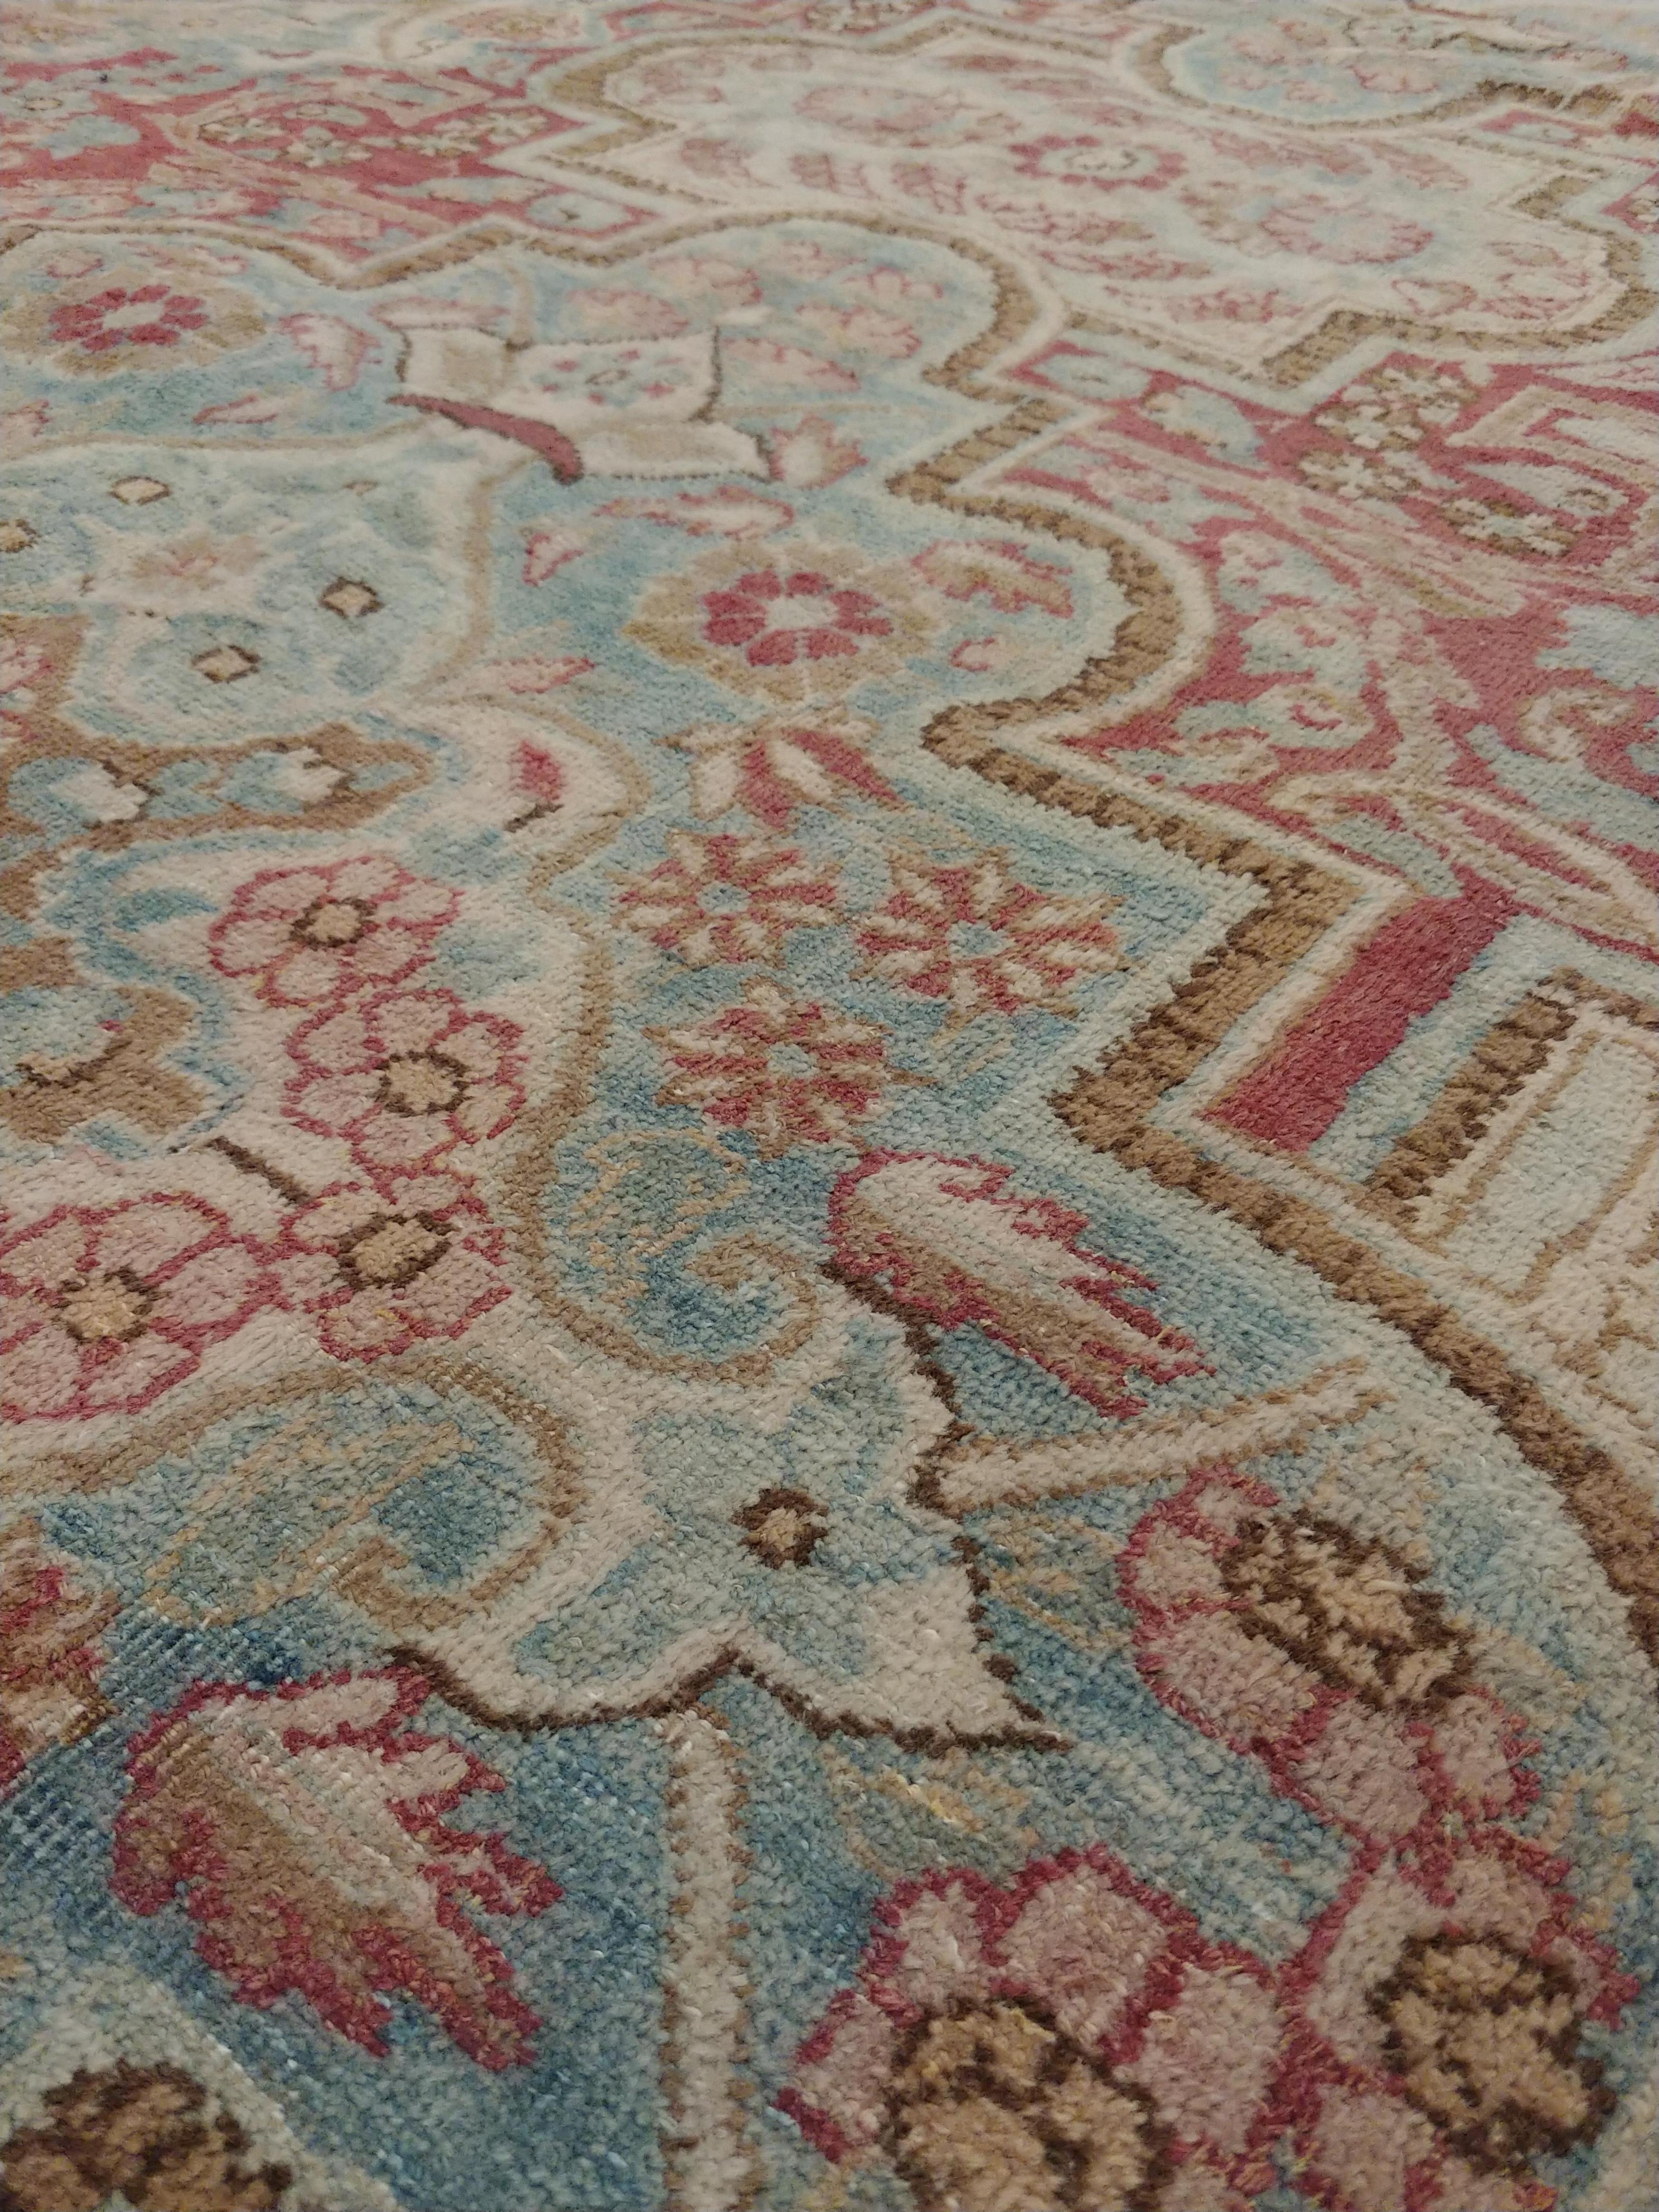 Antique Kerman Carpet, Handmade Persian Rug Wool Carpet Lt Blue, Beige and Coral In Fair Condition For Sale In Port Washington, NY